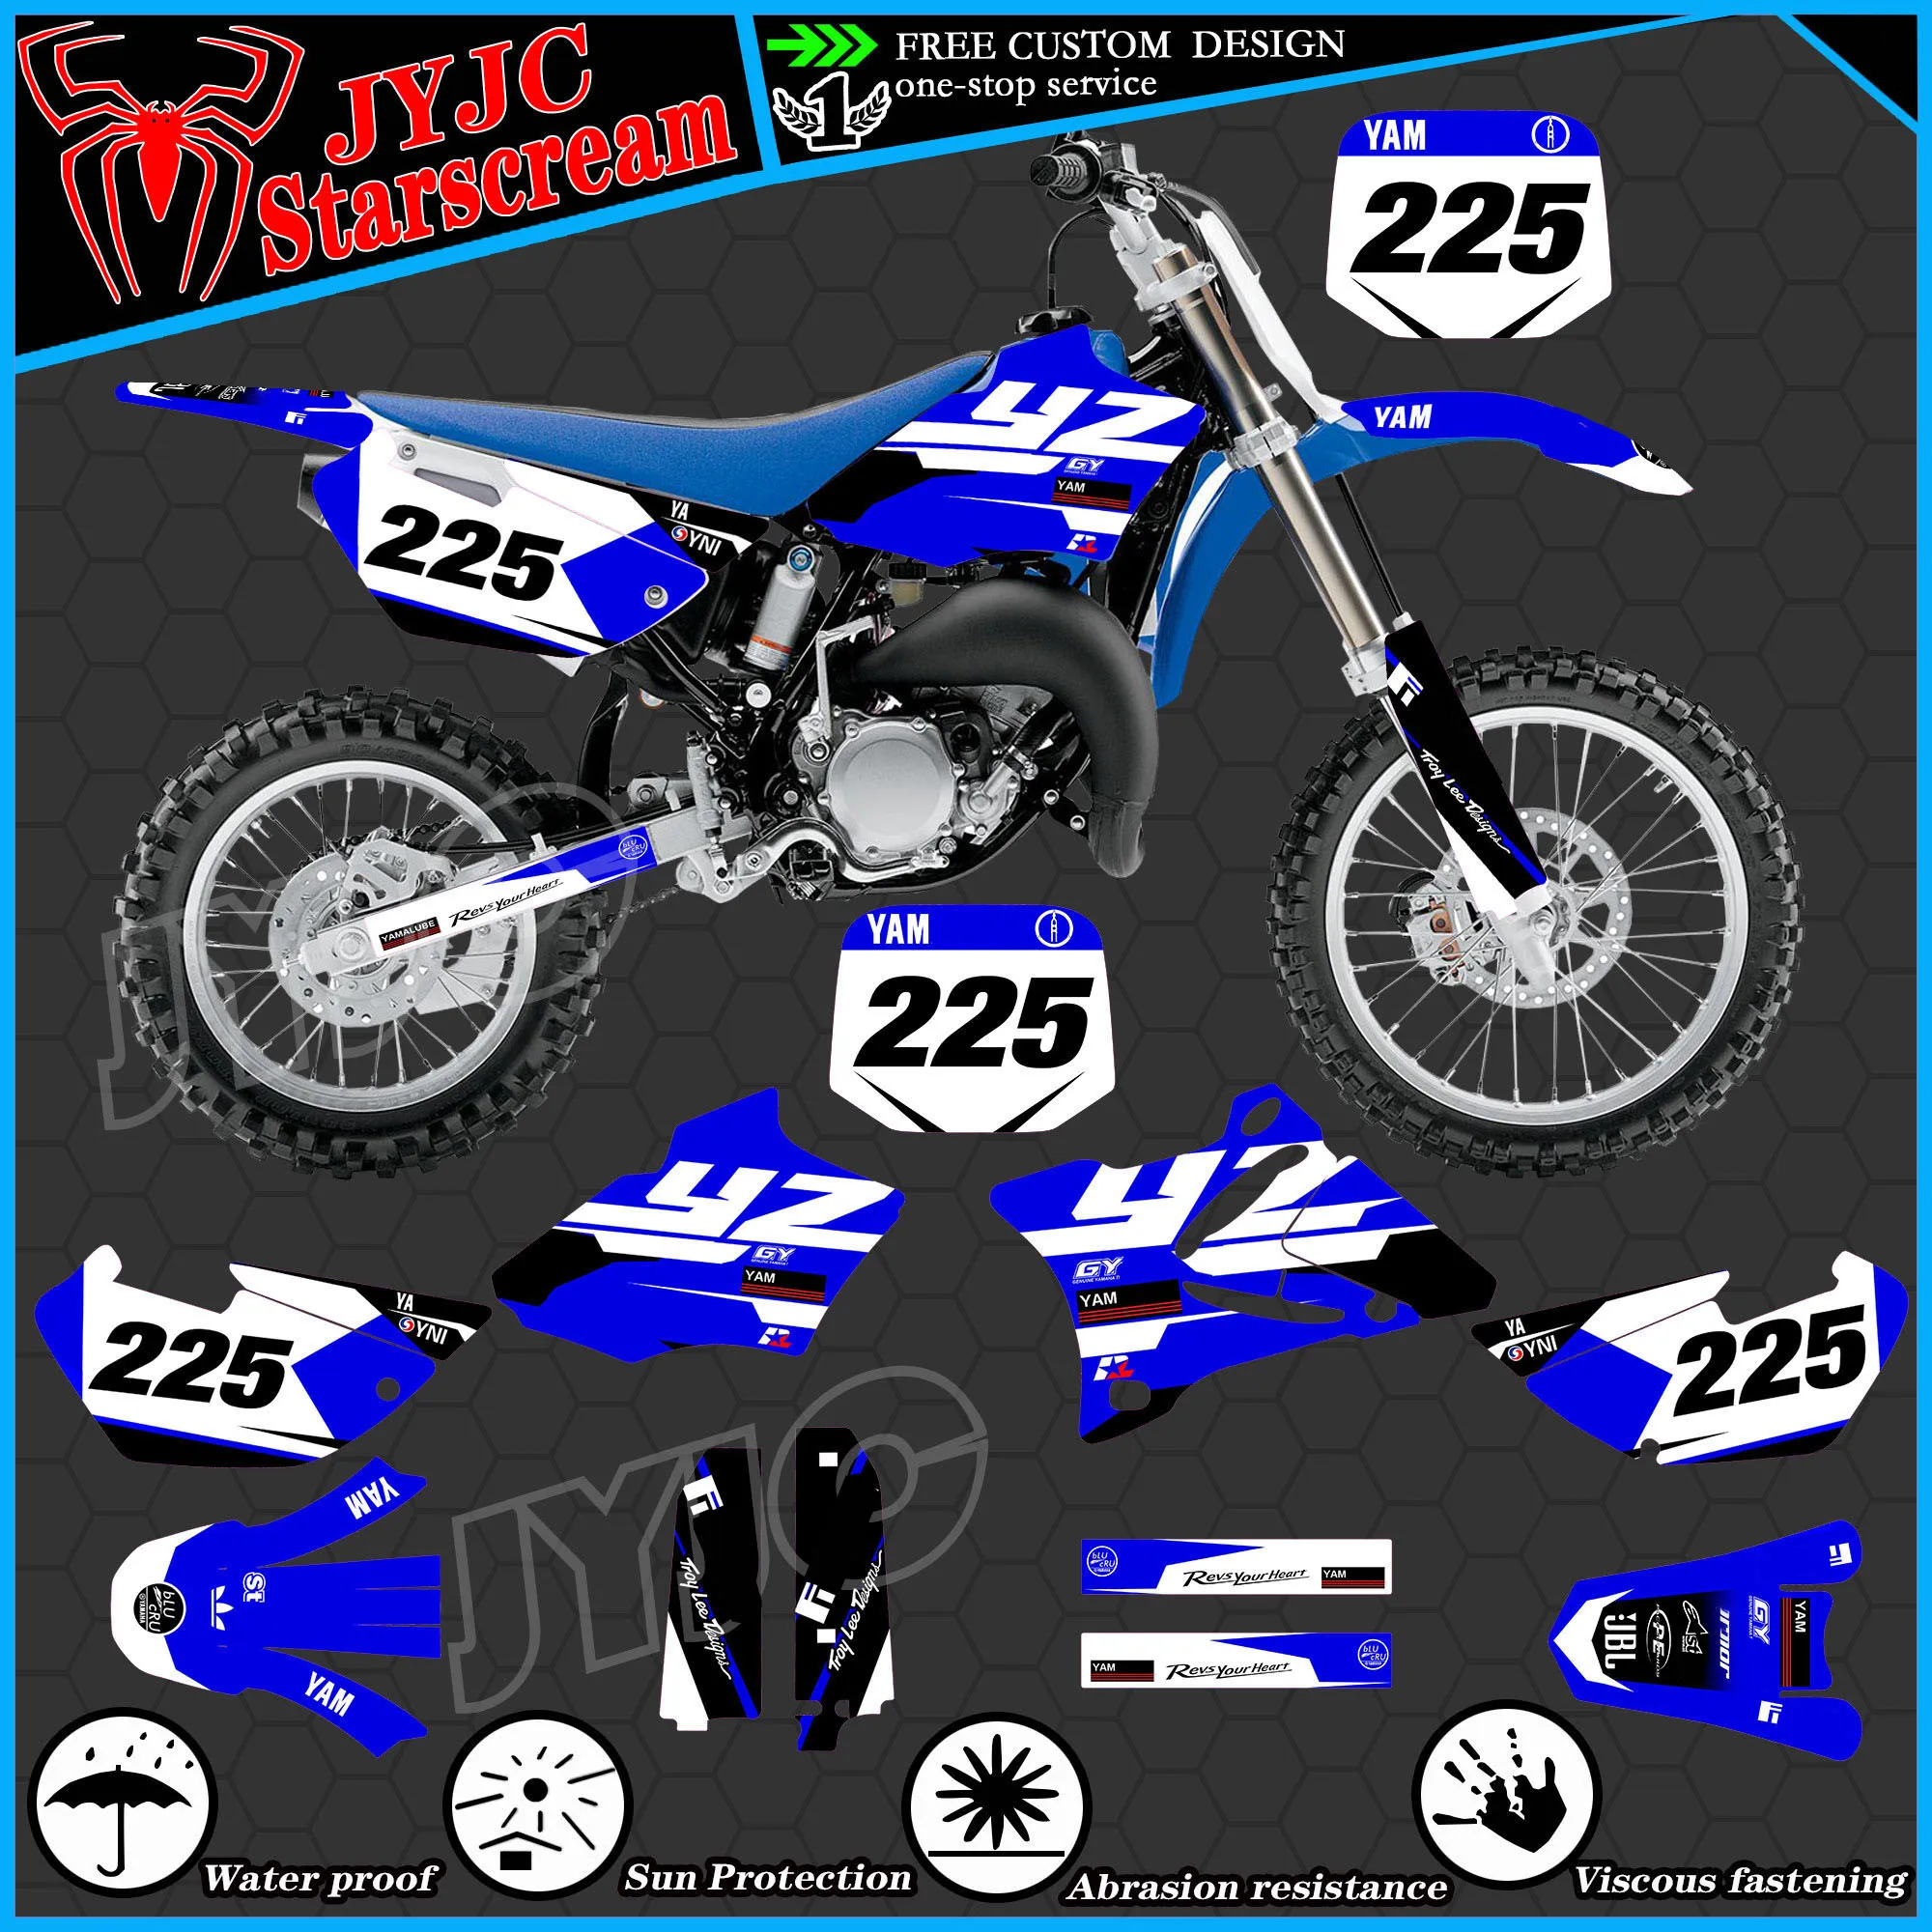 Graphic Kit for YAMAHA 2002 2003 2004 2005 2006 2007 2008 2009 2010 2011 2012 2013 2014 YZ85 Motorcycle Decal Stickers qcontrol 2 bt id46 special flip remote key for fiat panda 2003 2004 2005 2006 2007 2008 2009 2010 2011 2012 replace genuine key